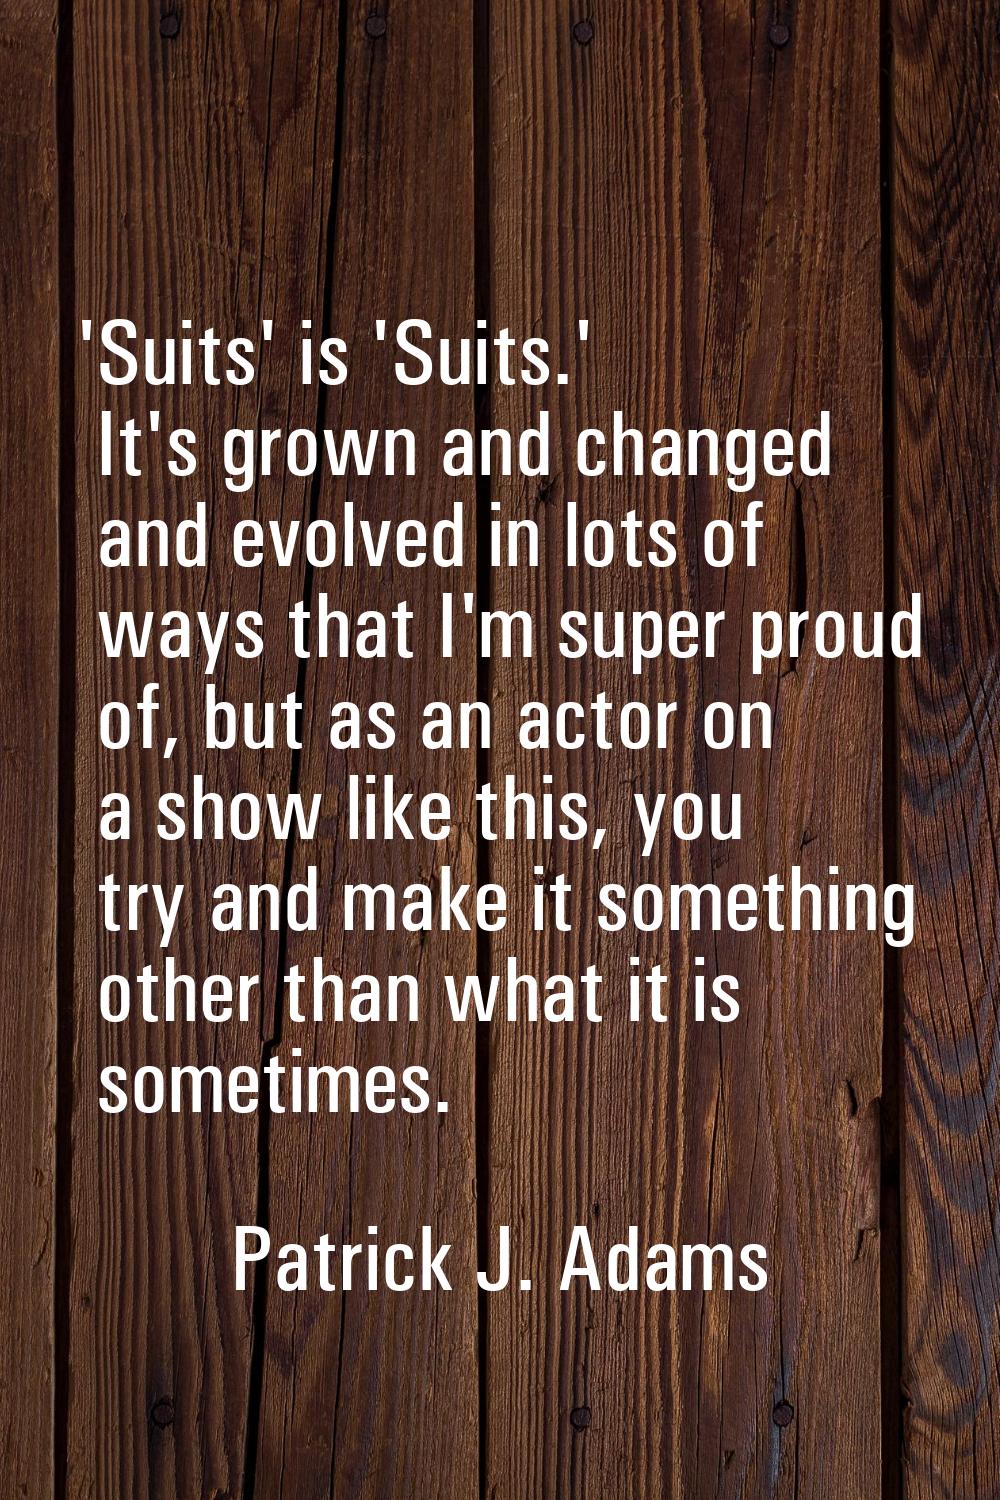 'Suits' is 'Suits.' It's grown and changed and evolved in lots of ways that I'm super proud of, but